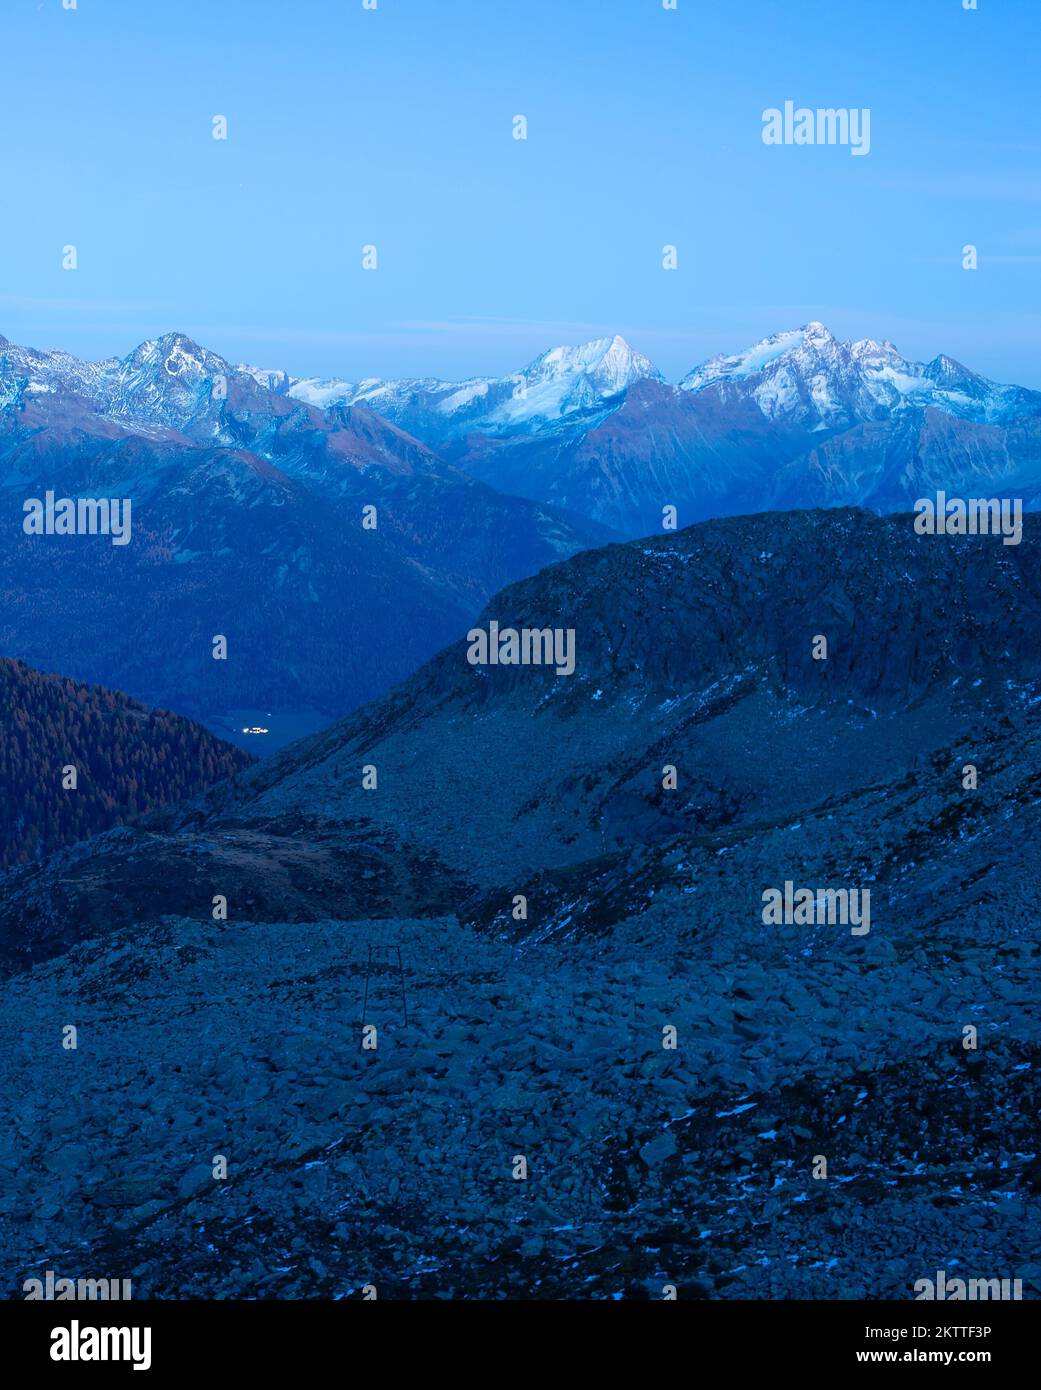 Dusk Alps landscape with mountain snowy peaks in background, Austria Stock Photo